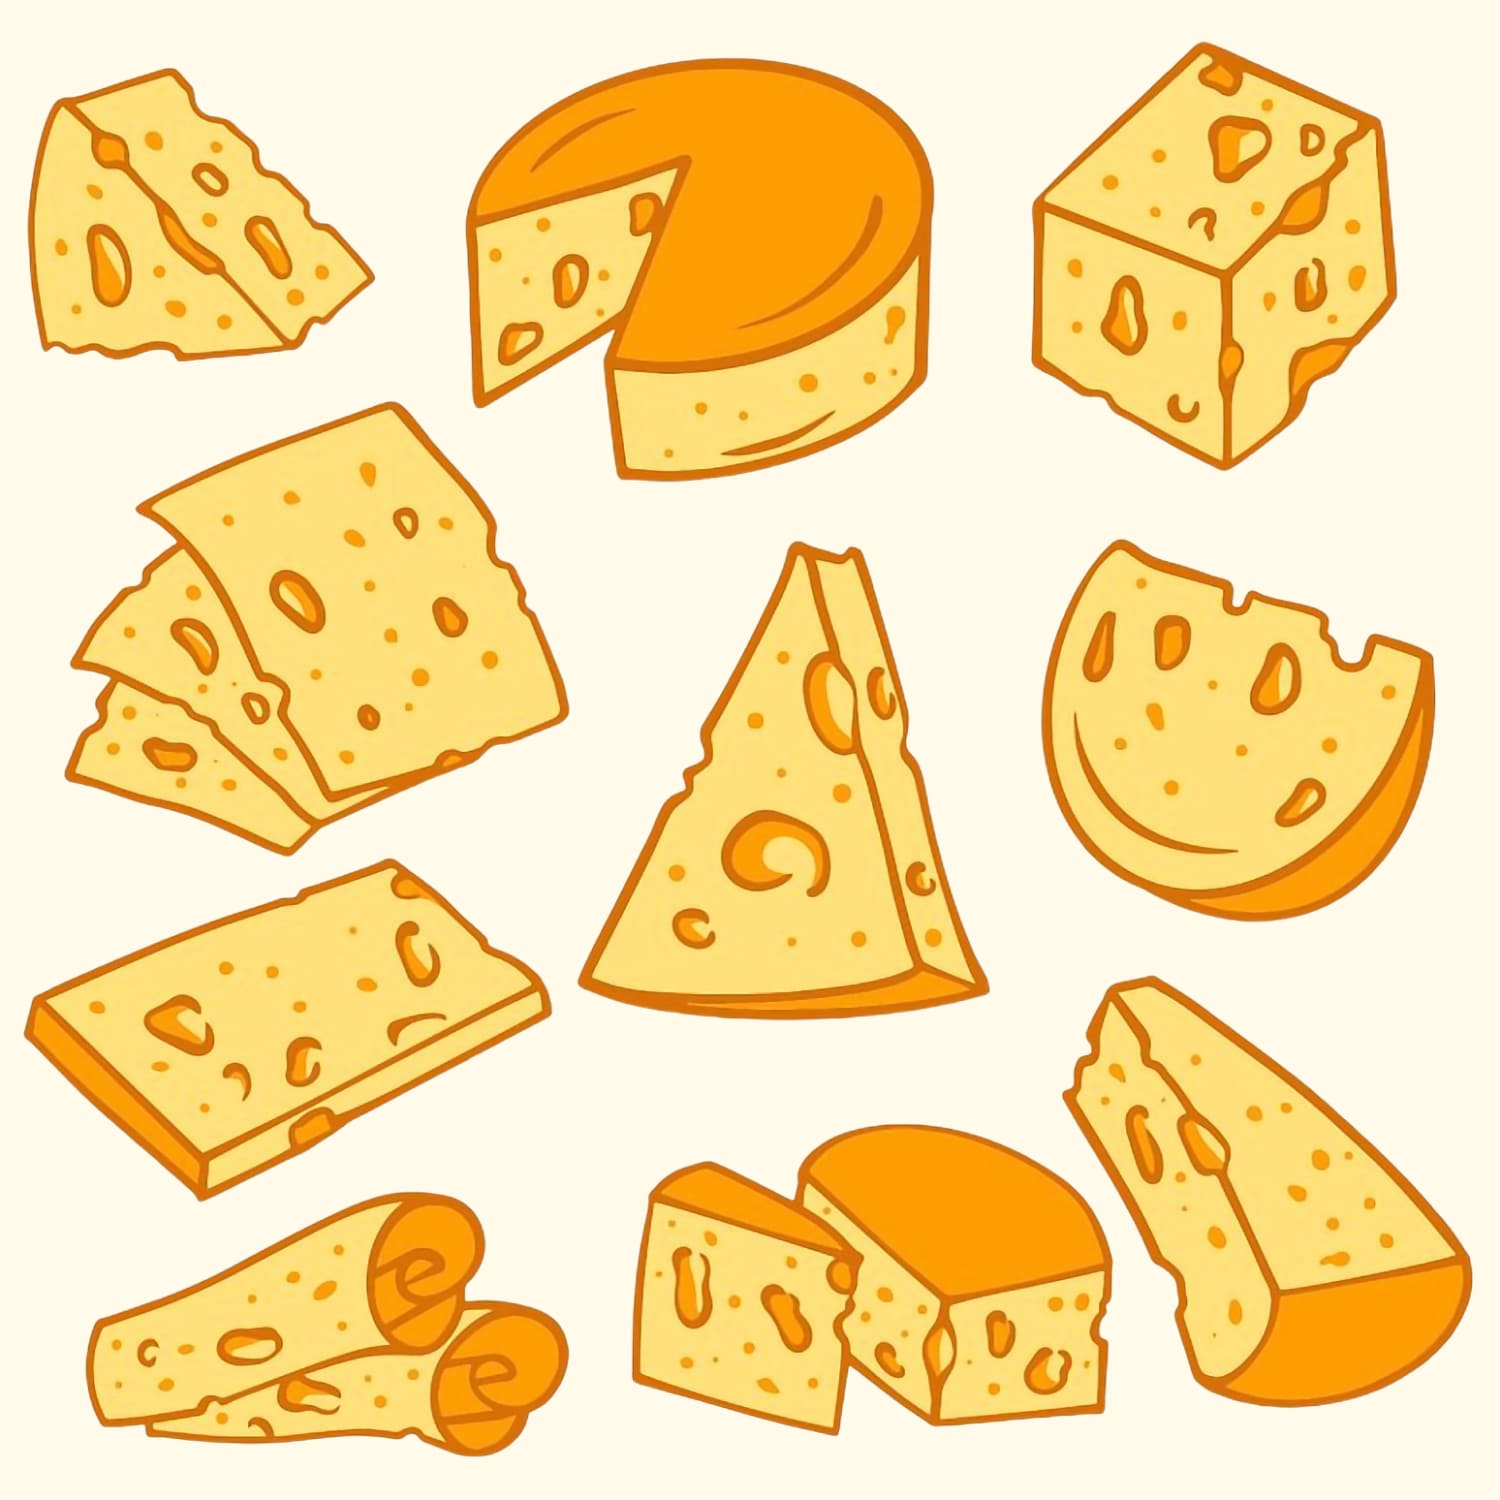 Cheese Element - Doodle Pack created by STR Graphs.